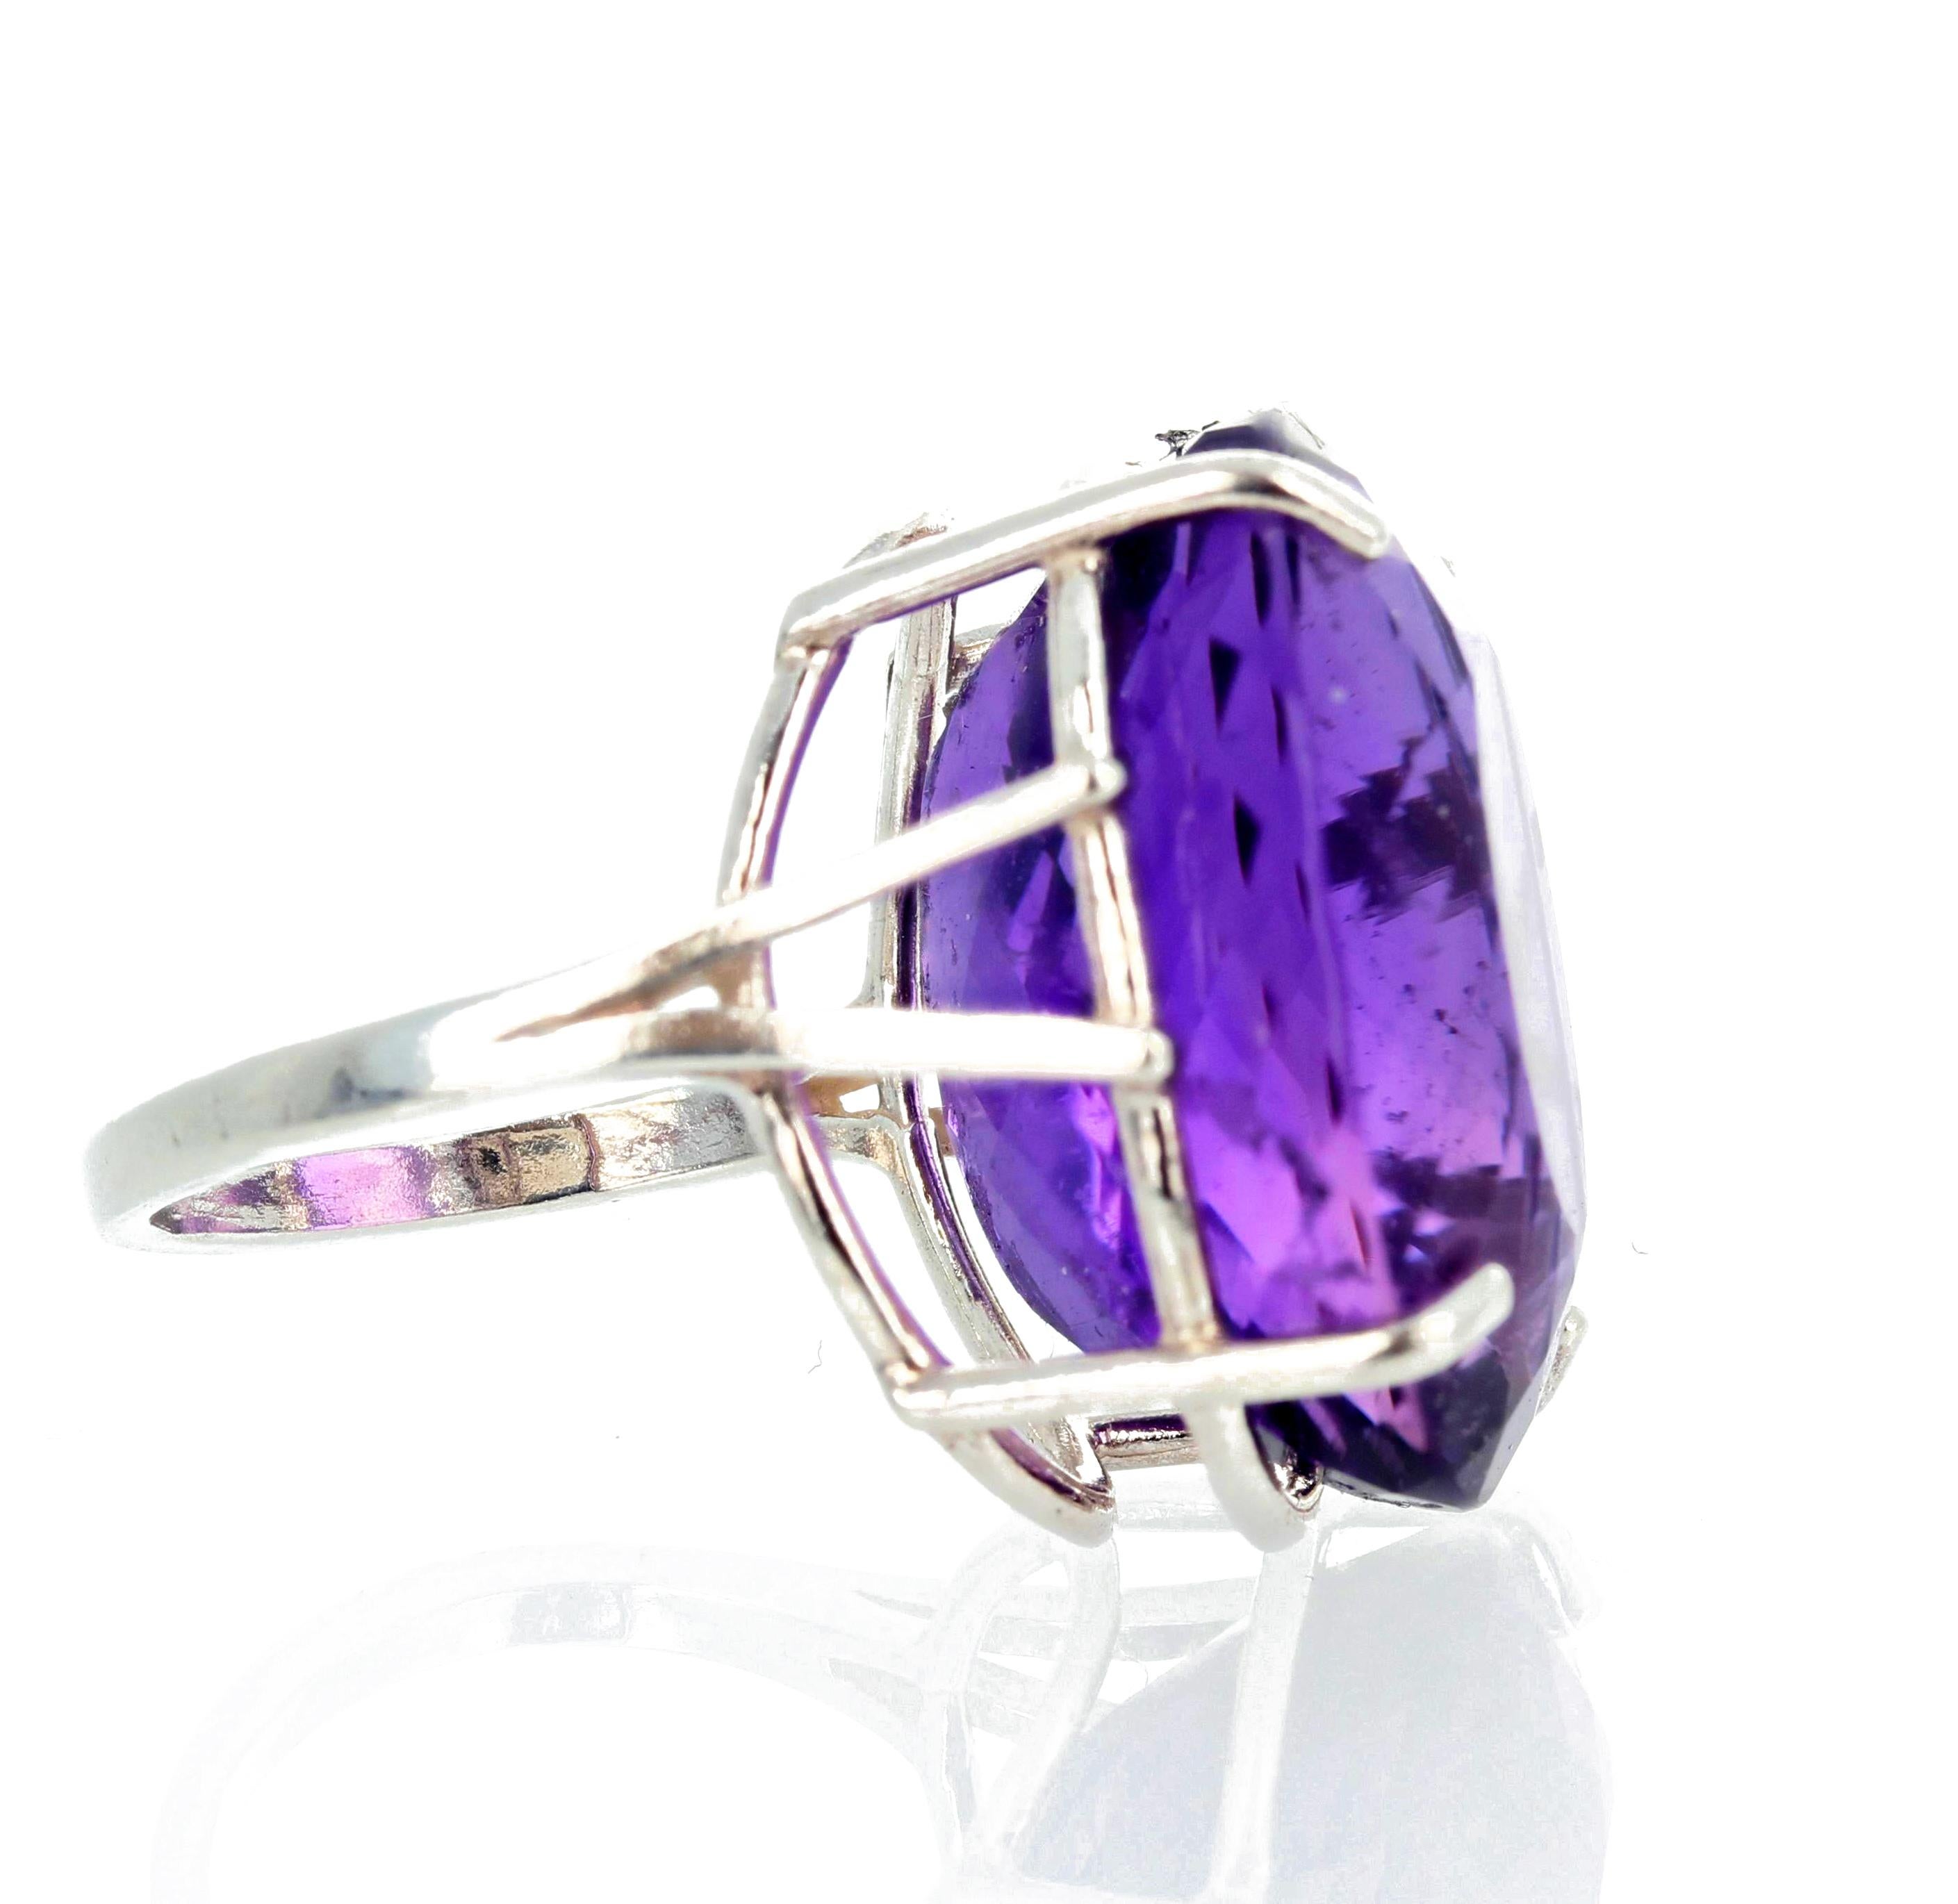 Oval Cut AJD Magnificent Large 30.2 Cts Intense Purple Amethyst Sterling Silver Ring